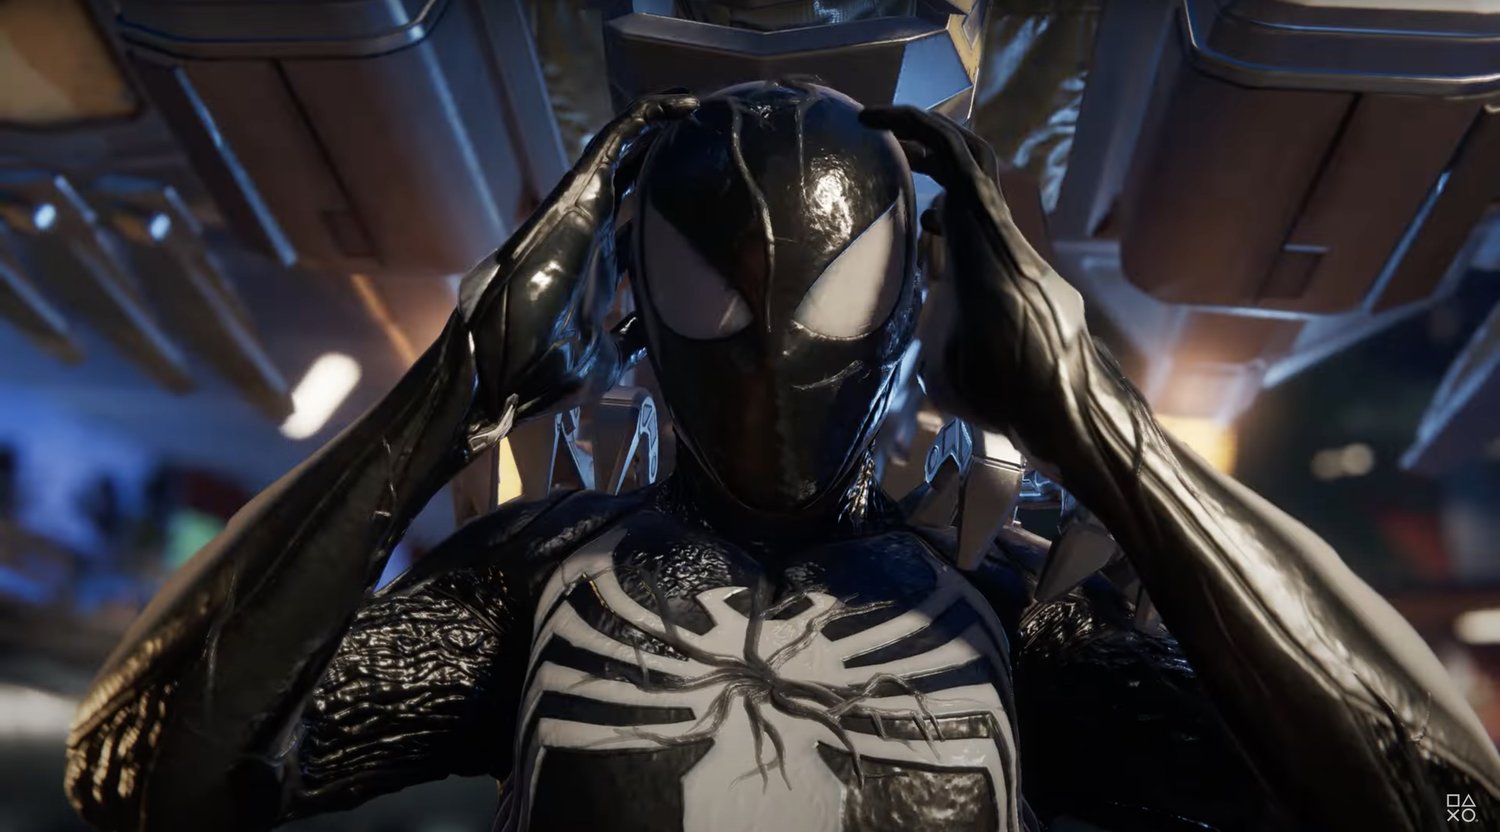 Awesome Story Trailer For Marvel's SPIDERMAN 2 Features Venom in